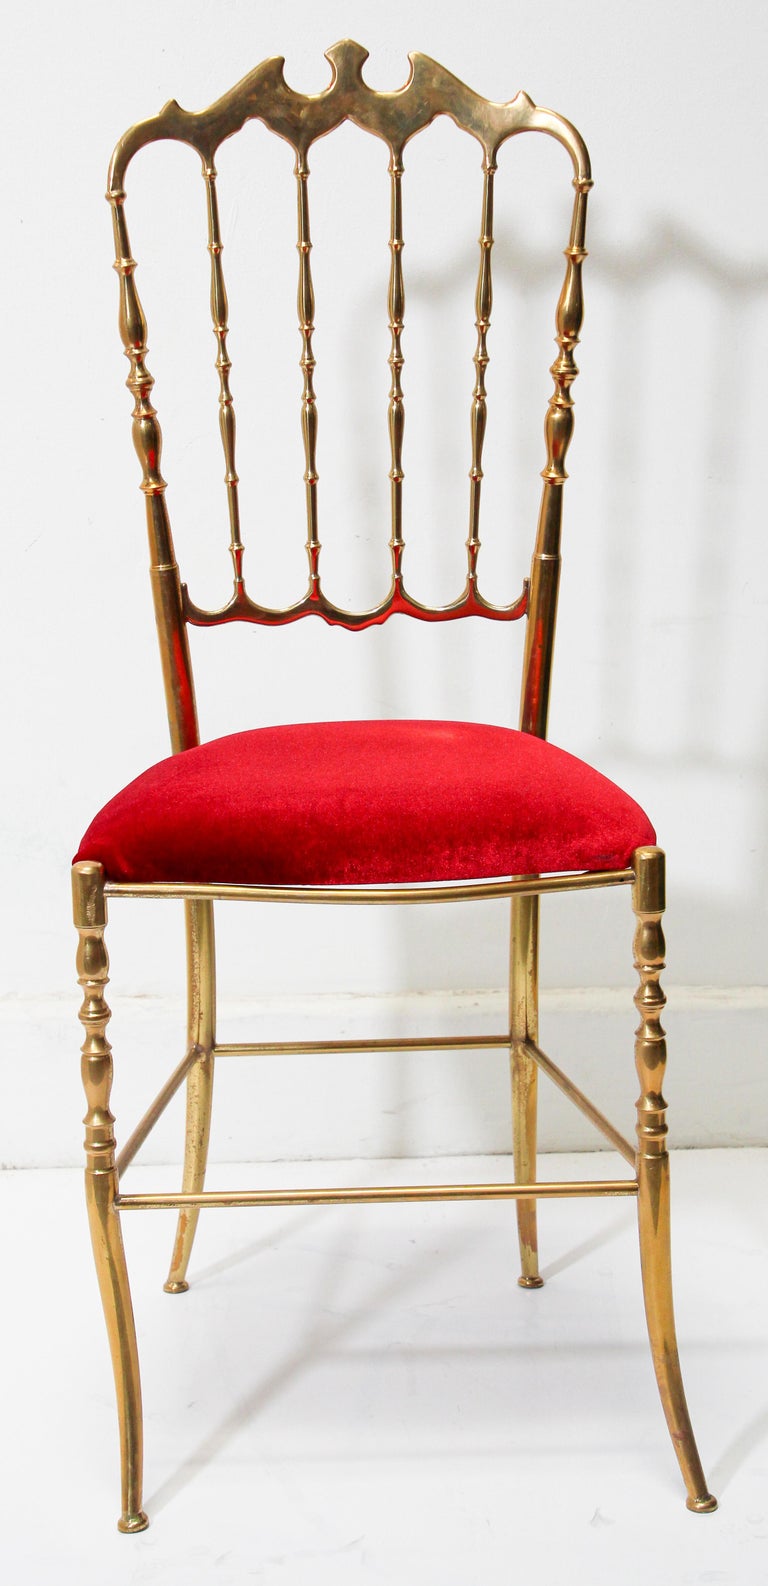 Stunning Italian polished brass Chiavari chair with bat motif and red velvet upholstery, circa 1960s.
Designed by Giuseppe Gaetano Descalzi and produced since the early 19th century in the Ligurian town of Chiavari, Italy.
Perfect for a writing